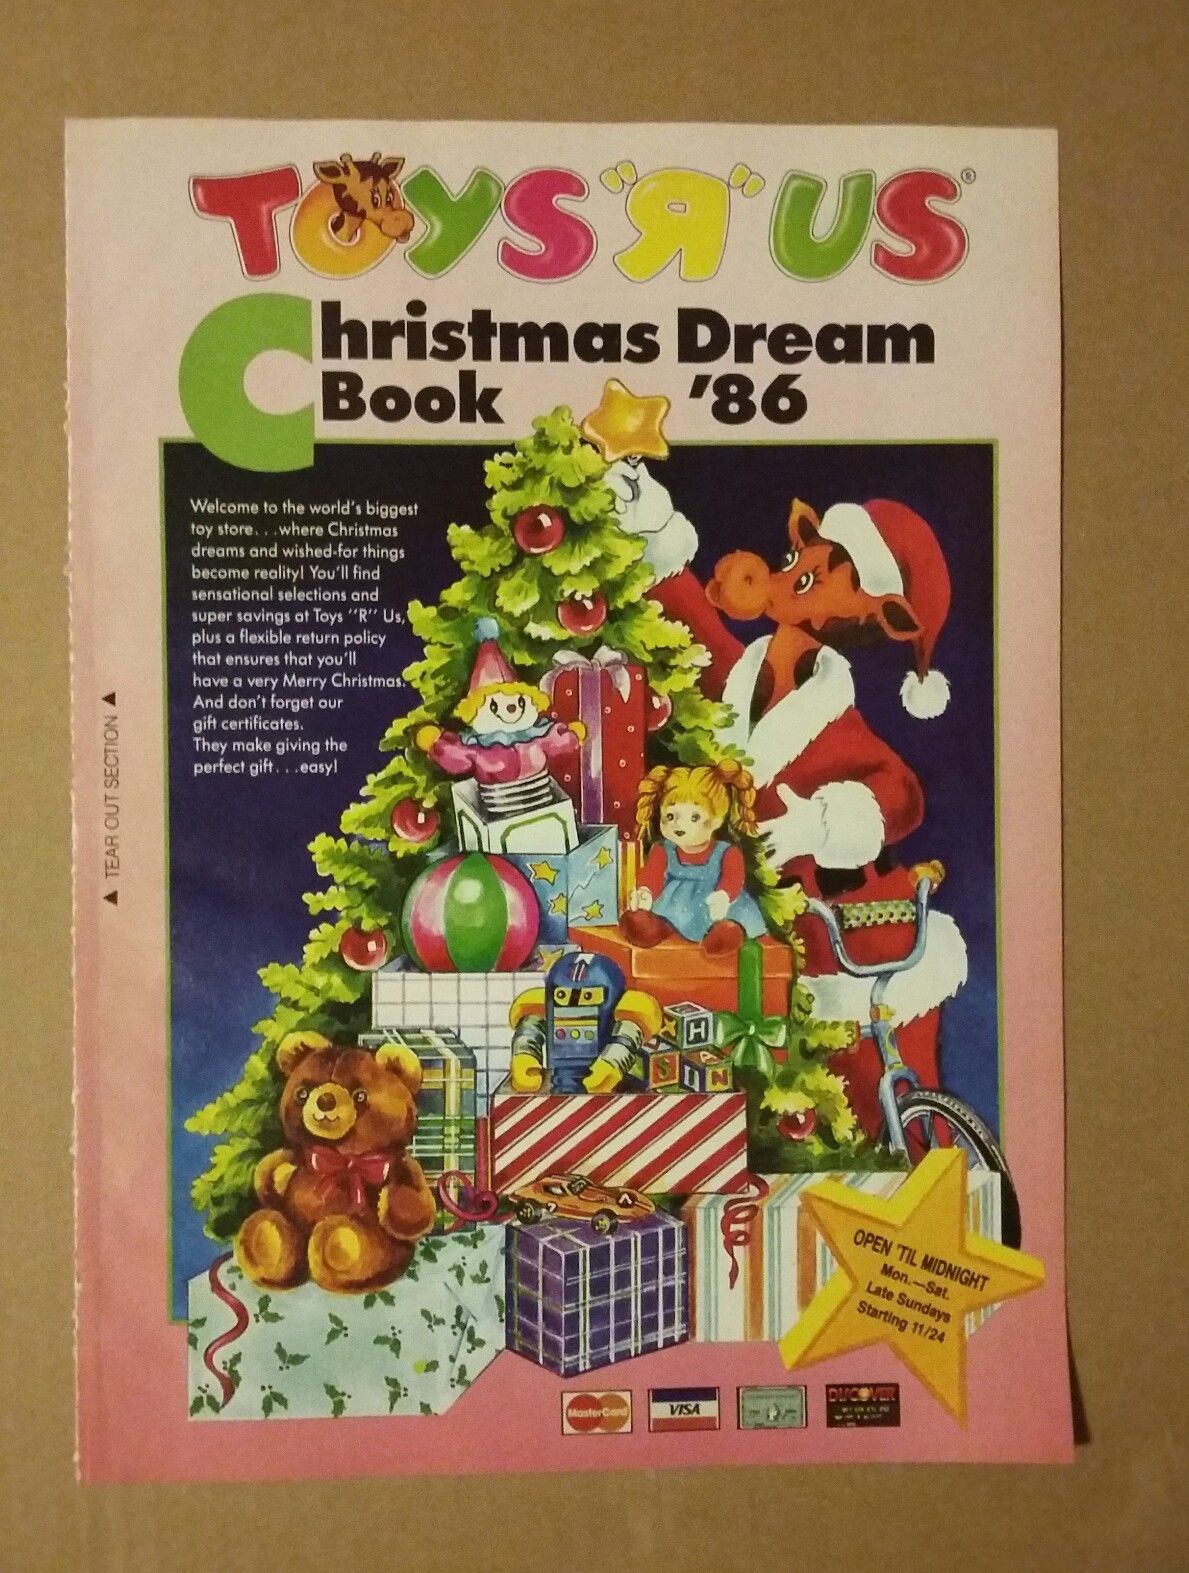 1980s christmas toys - Ys Tus hristmas Dream Book 186 Welcome to the world's biggest toy store.. where Christmas dreams and wished for things become reality! You'll find sensational selections and super savings at Toys"R" Us, plus a flexible return policy